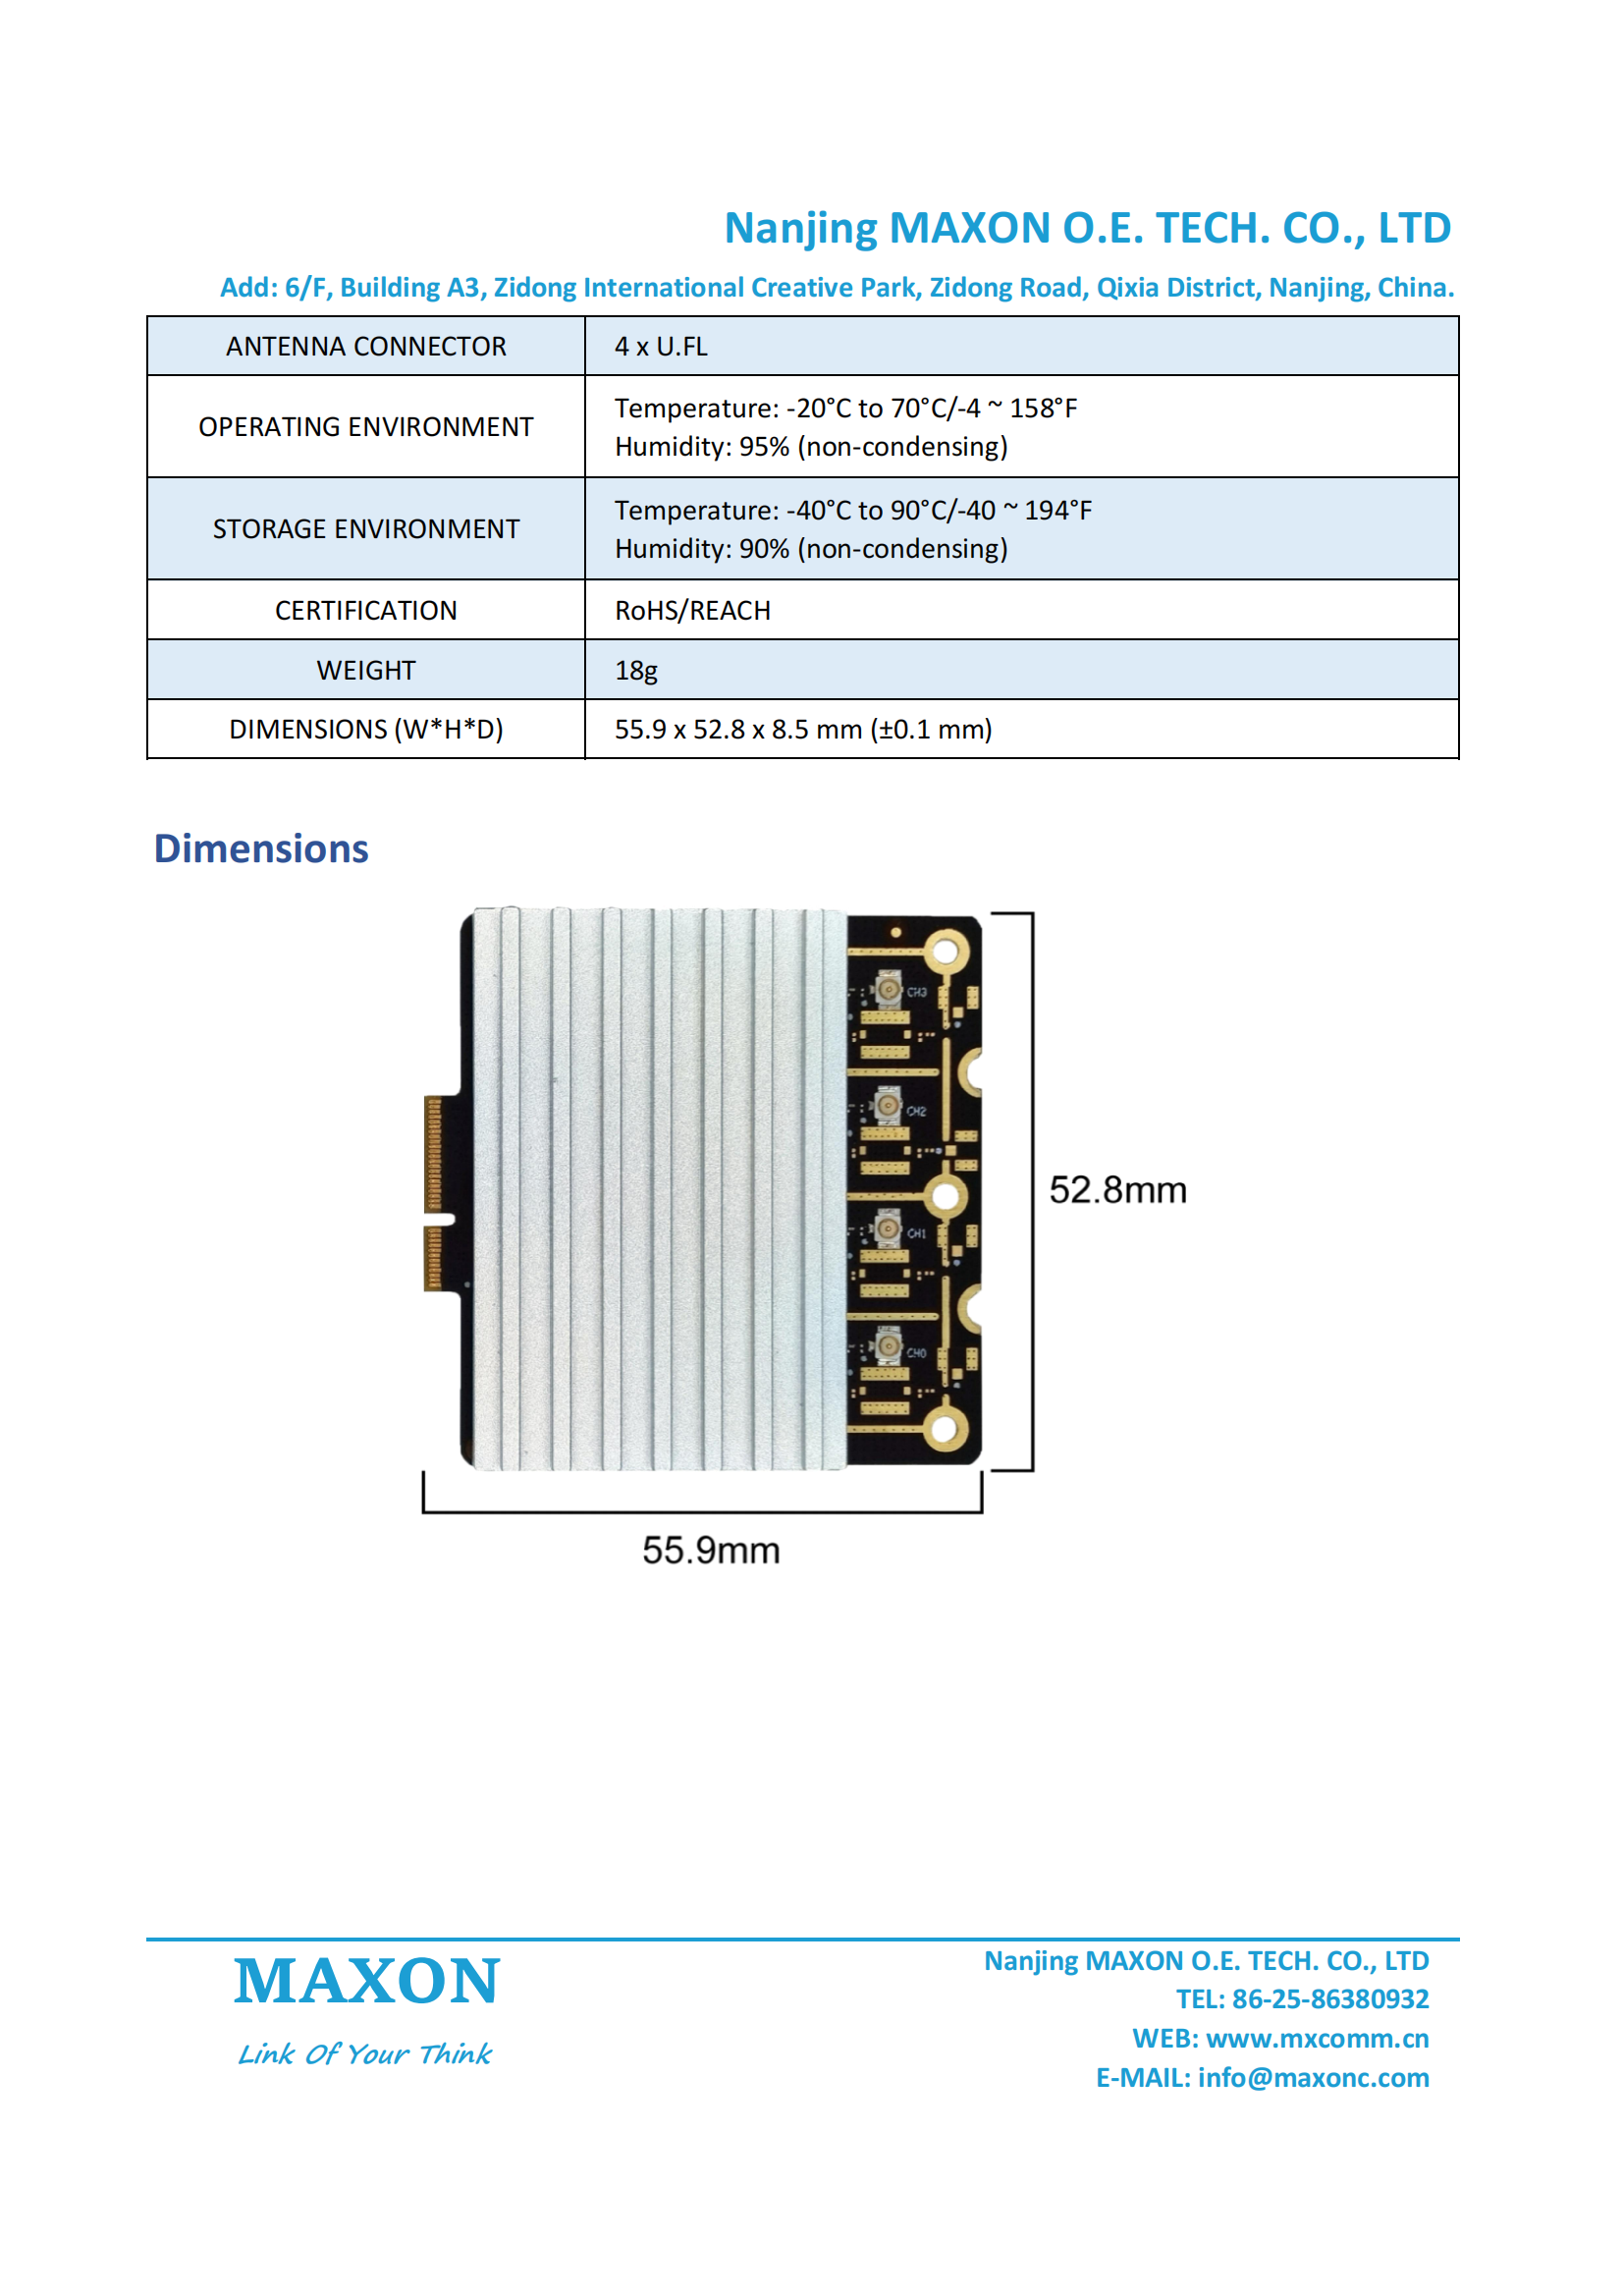 Difference between Maxon WiFi6 4×4 M.2 Wireless Module with QCN9074 & QCN9024?